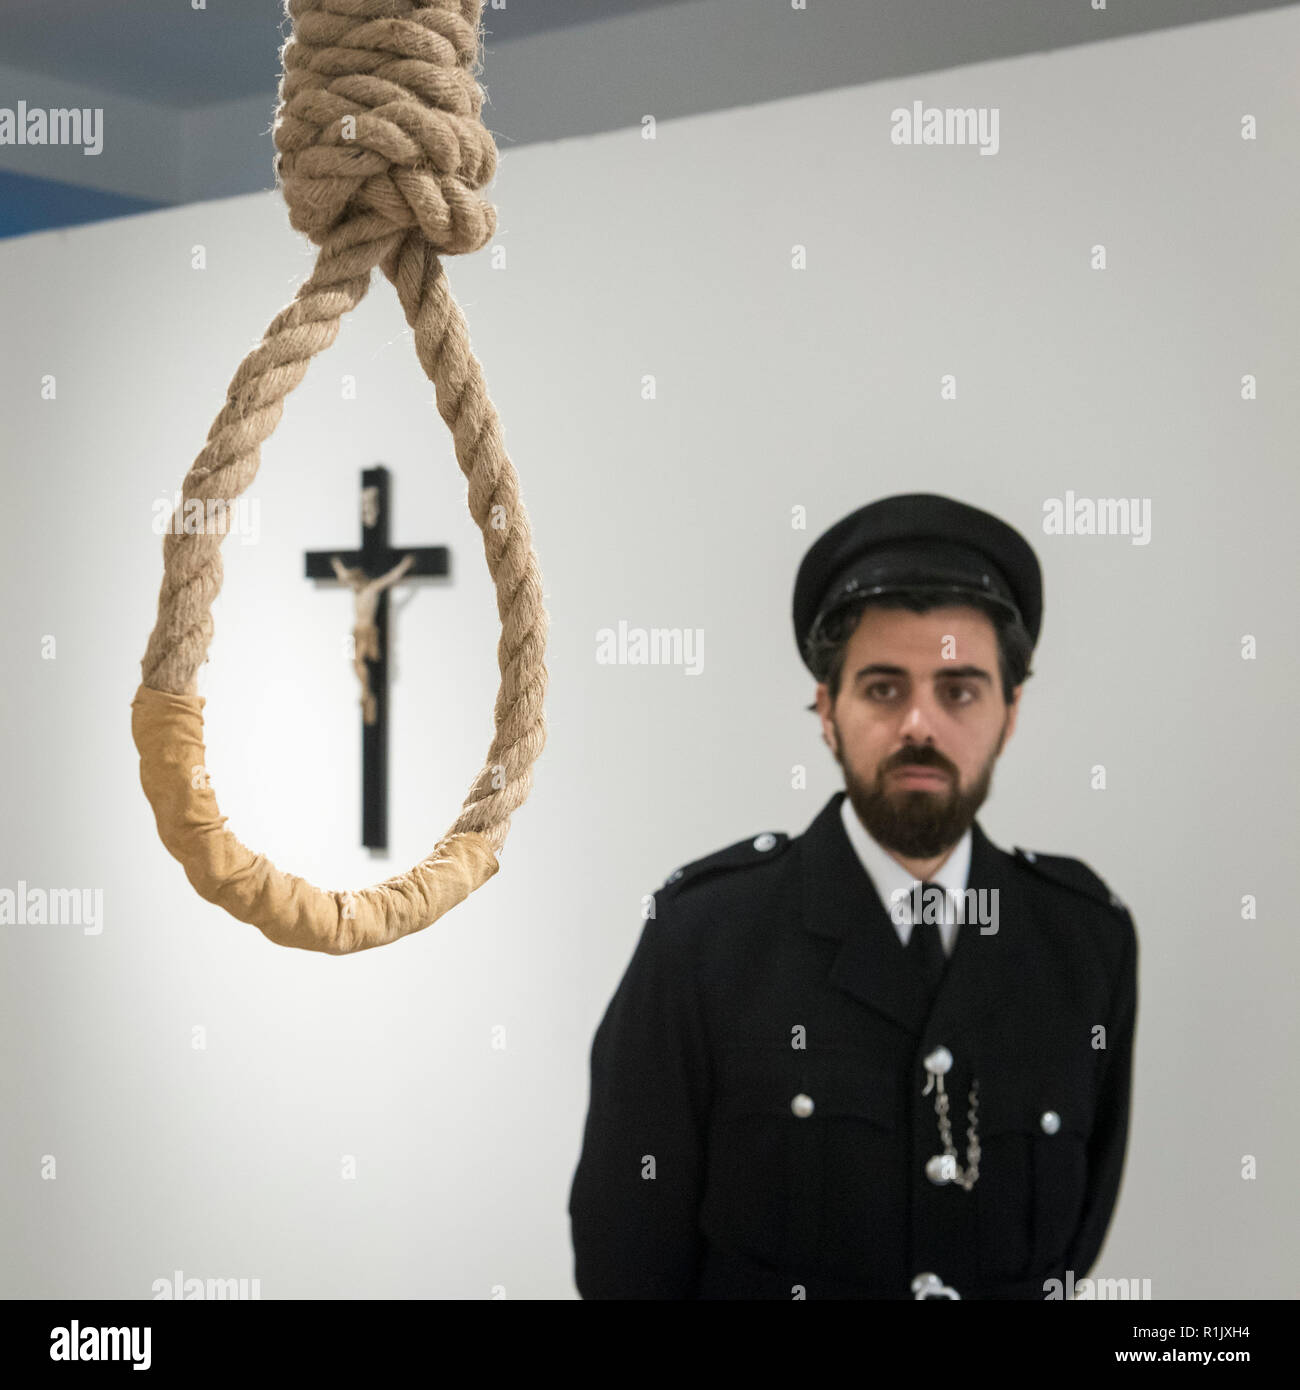 London, UK.  13 November 2018. A staff member, posing as a prison guard, views a hangman's noose.  Preview of 'Glad I Did It', a new work by Irish artist Christina Reihill at Bermondsey Project Space.  The interactive artwork looks at the life and death of Ruth Ellis, the last woman to be hanged in Britain, after she shot her lover, racing driver, David Blakely in 1955.  On display are the artist's interpretation of Ruth Ellis' prison cell, including furniture and props, the hanging room together with a video display of the artist in conversation. Credit: Stephen Chung/Alamy Live News Stock Photo